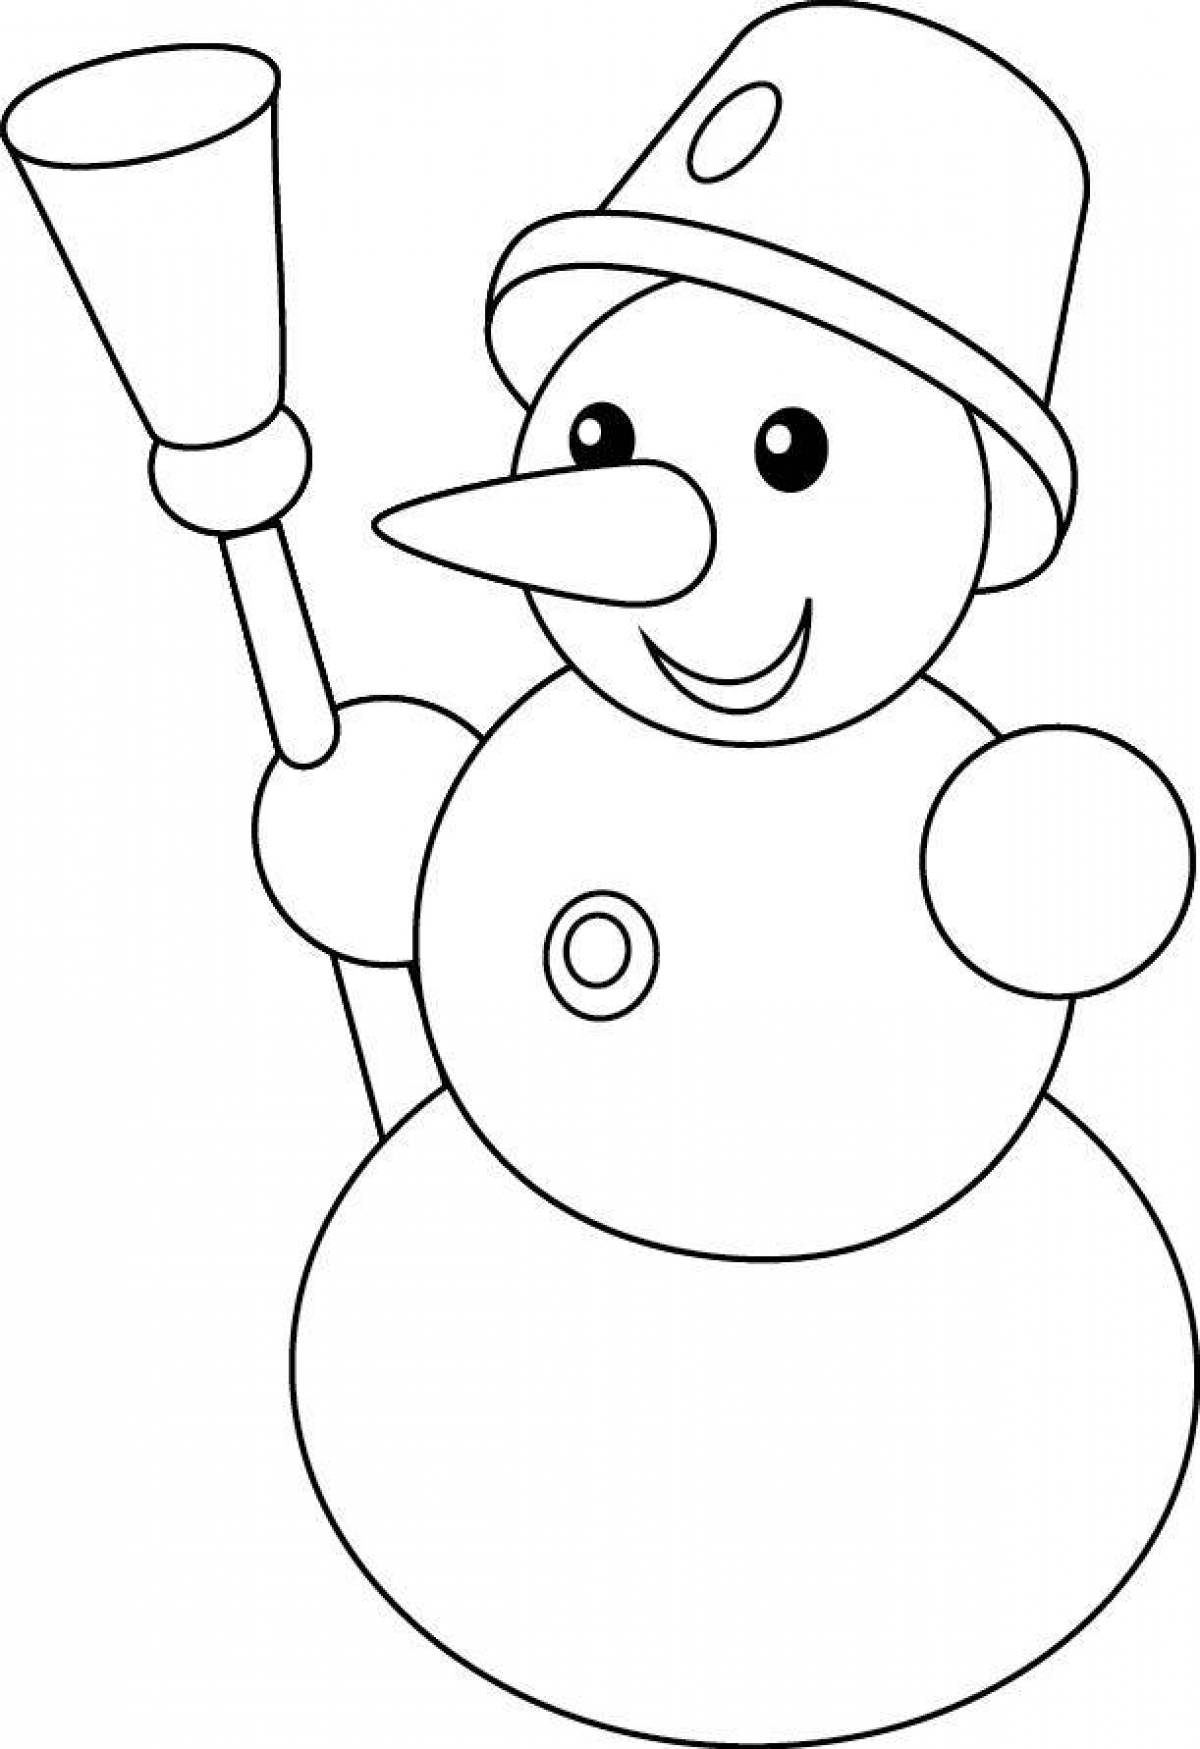 Snowman for children 2 3 years old #11